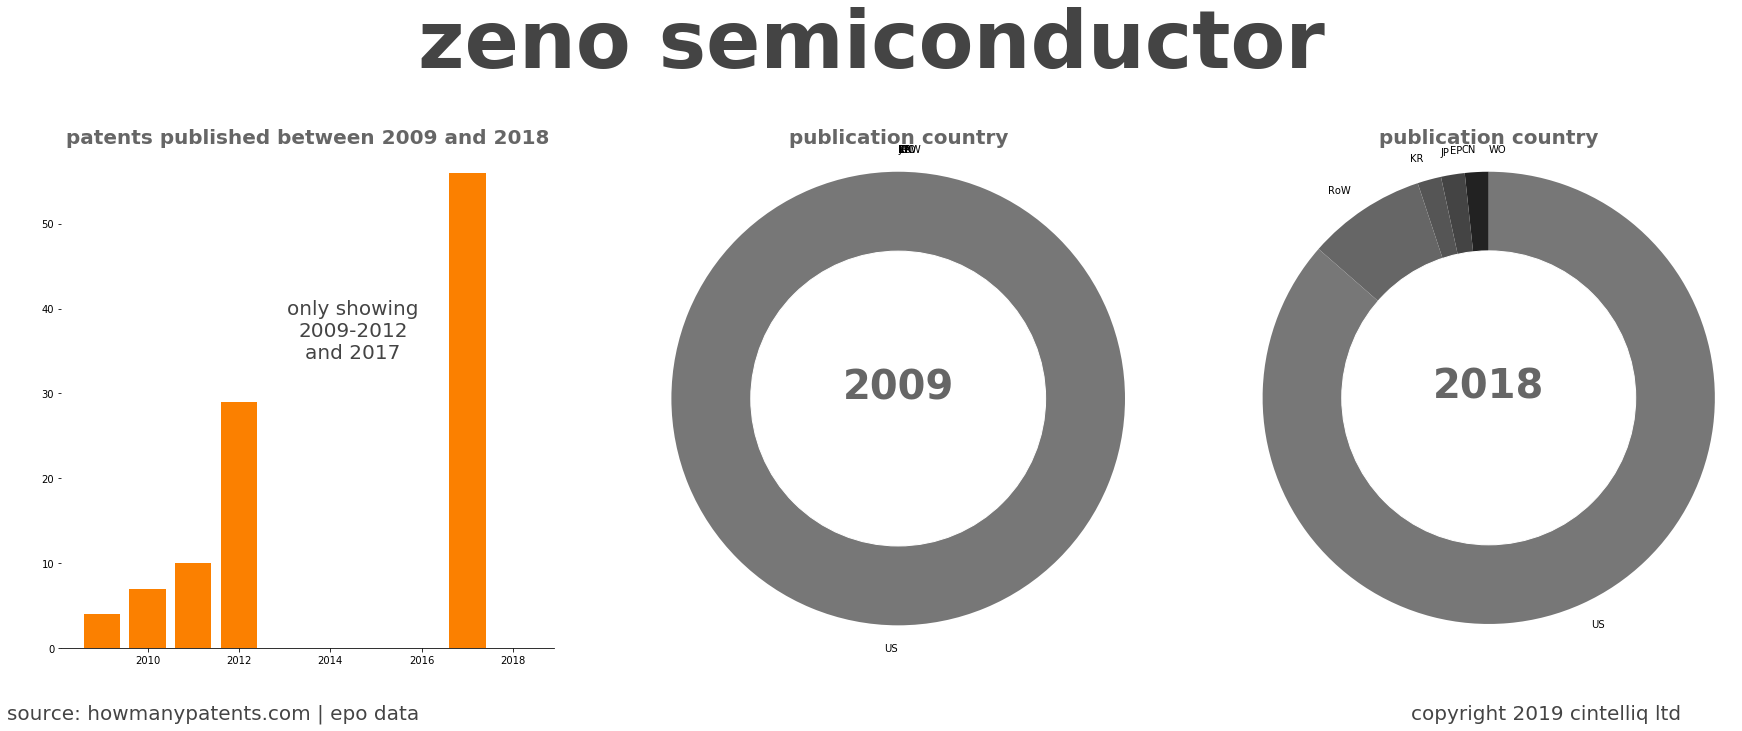 summary of patents for Zeno Semiconductor